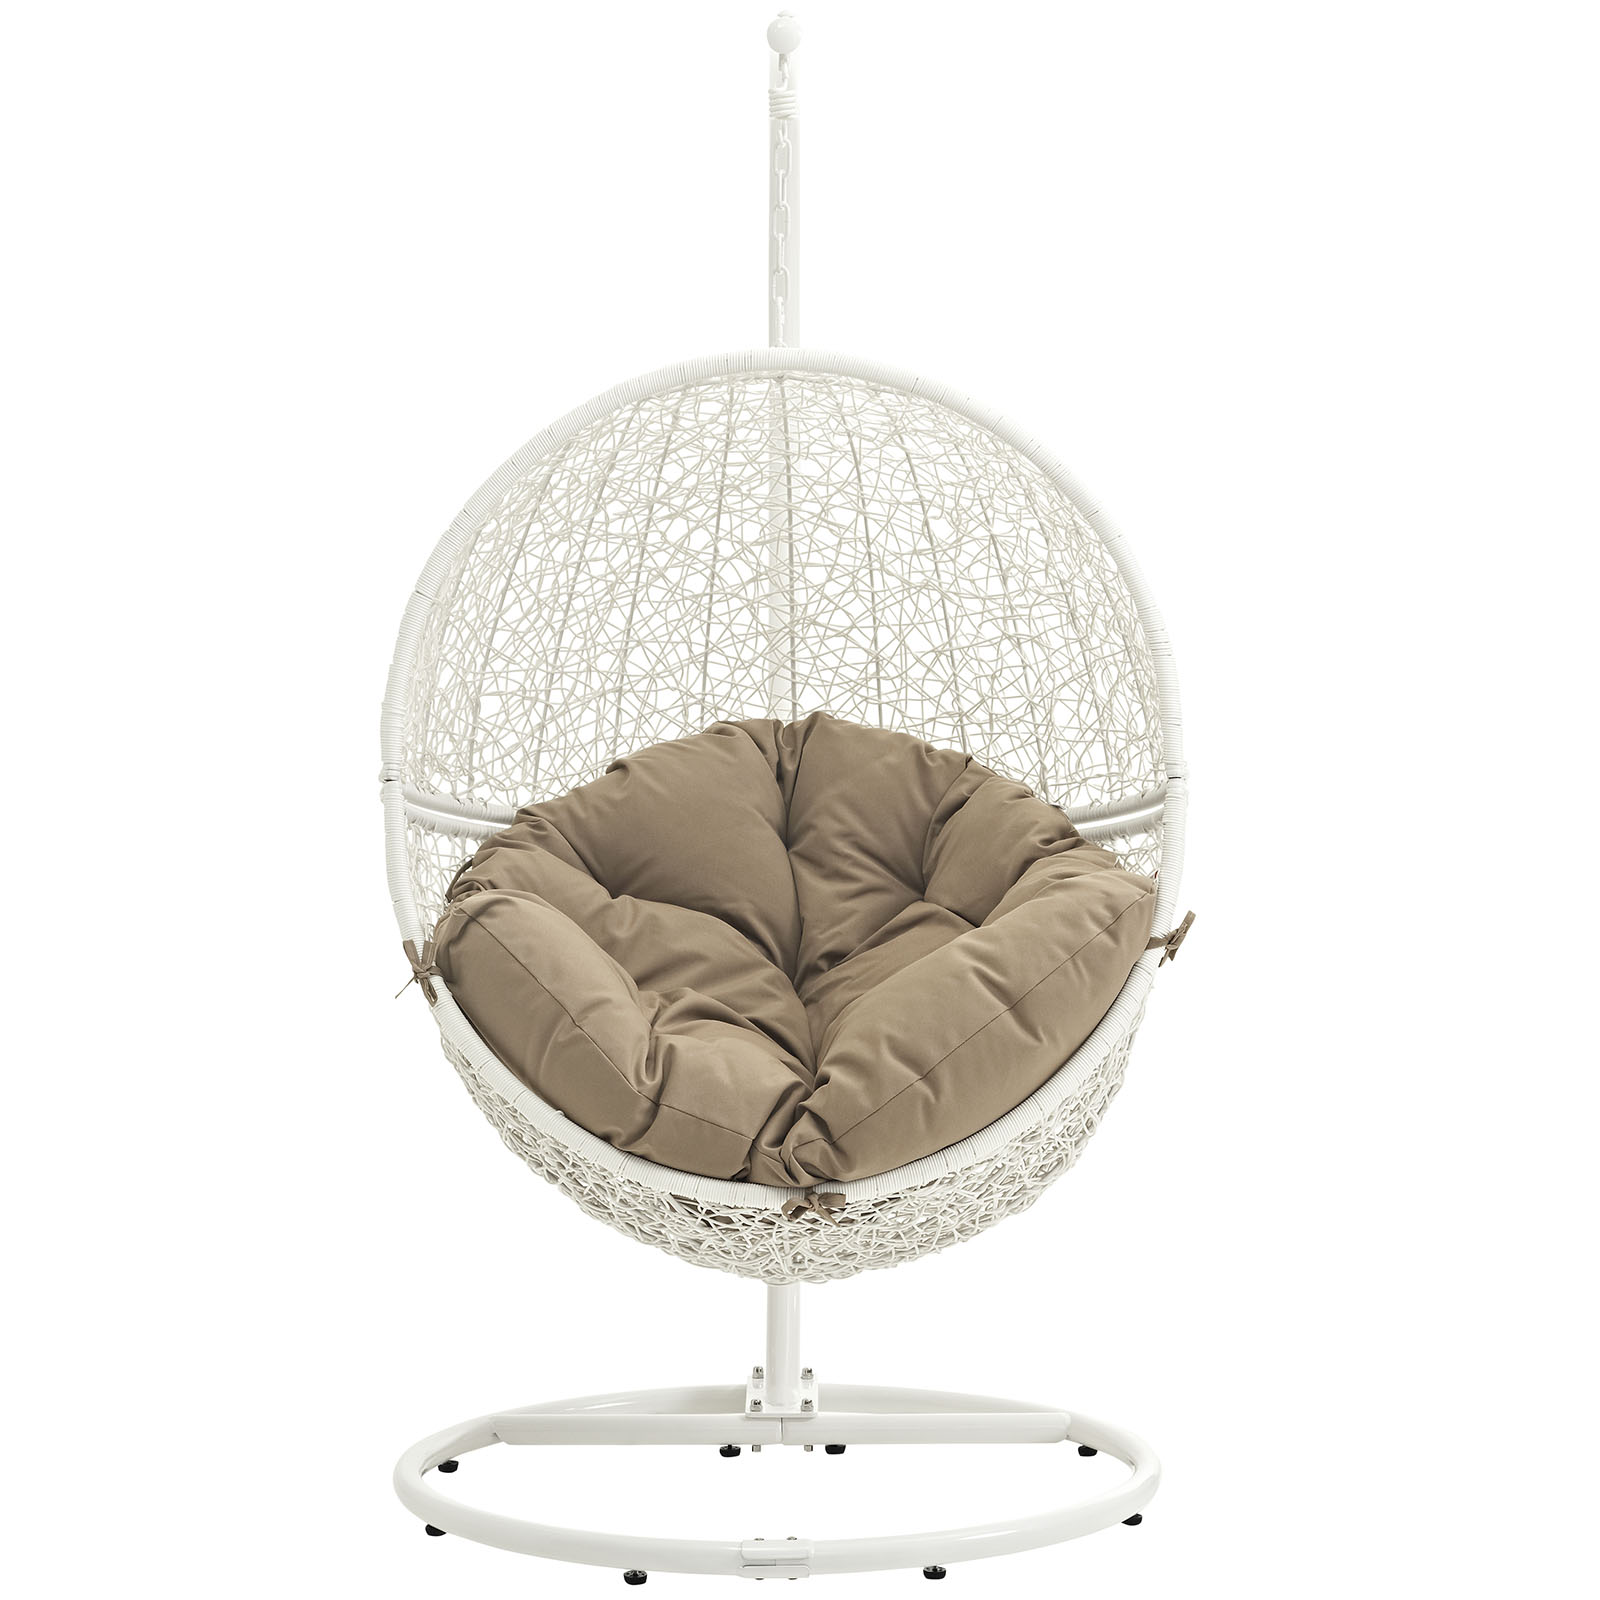 LexMod Hide Outdoor Patio Swing Chair With Stand in White Mocha